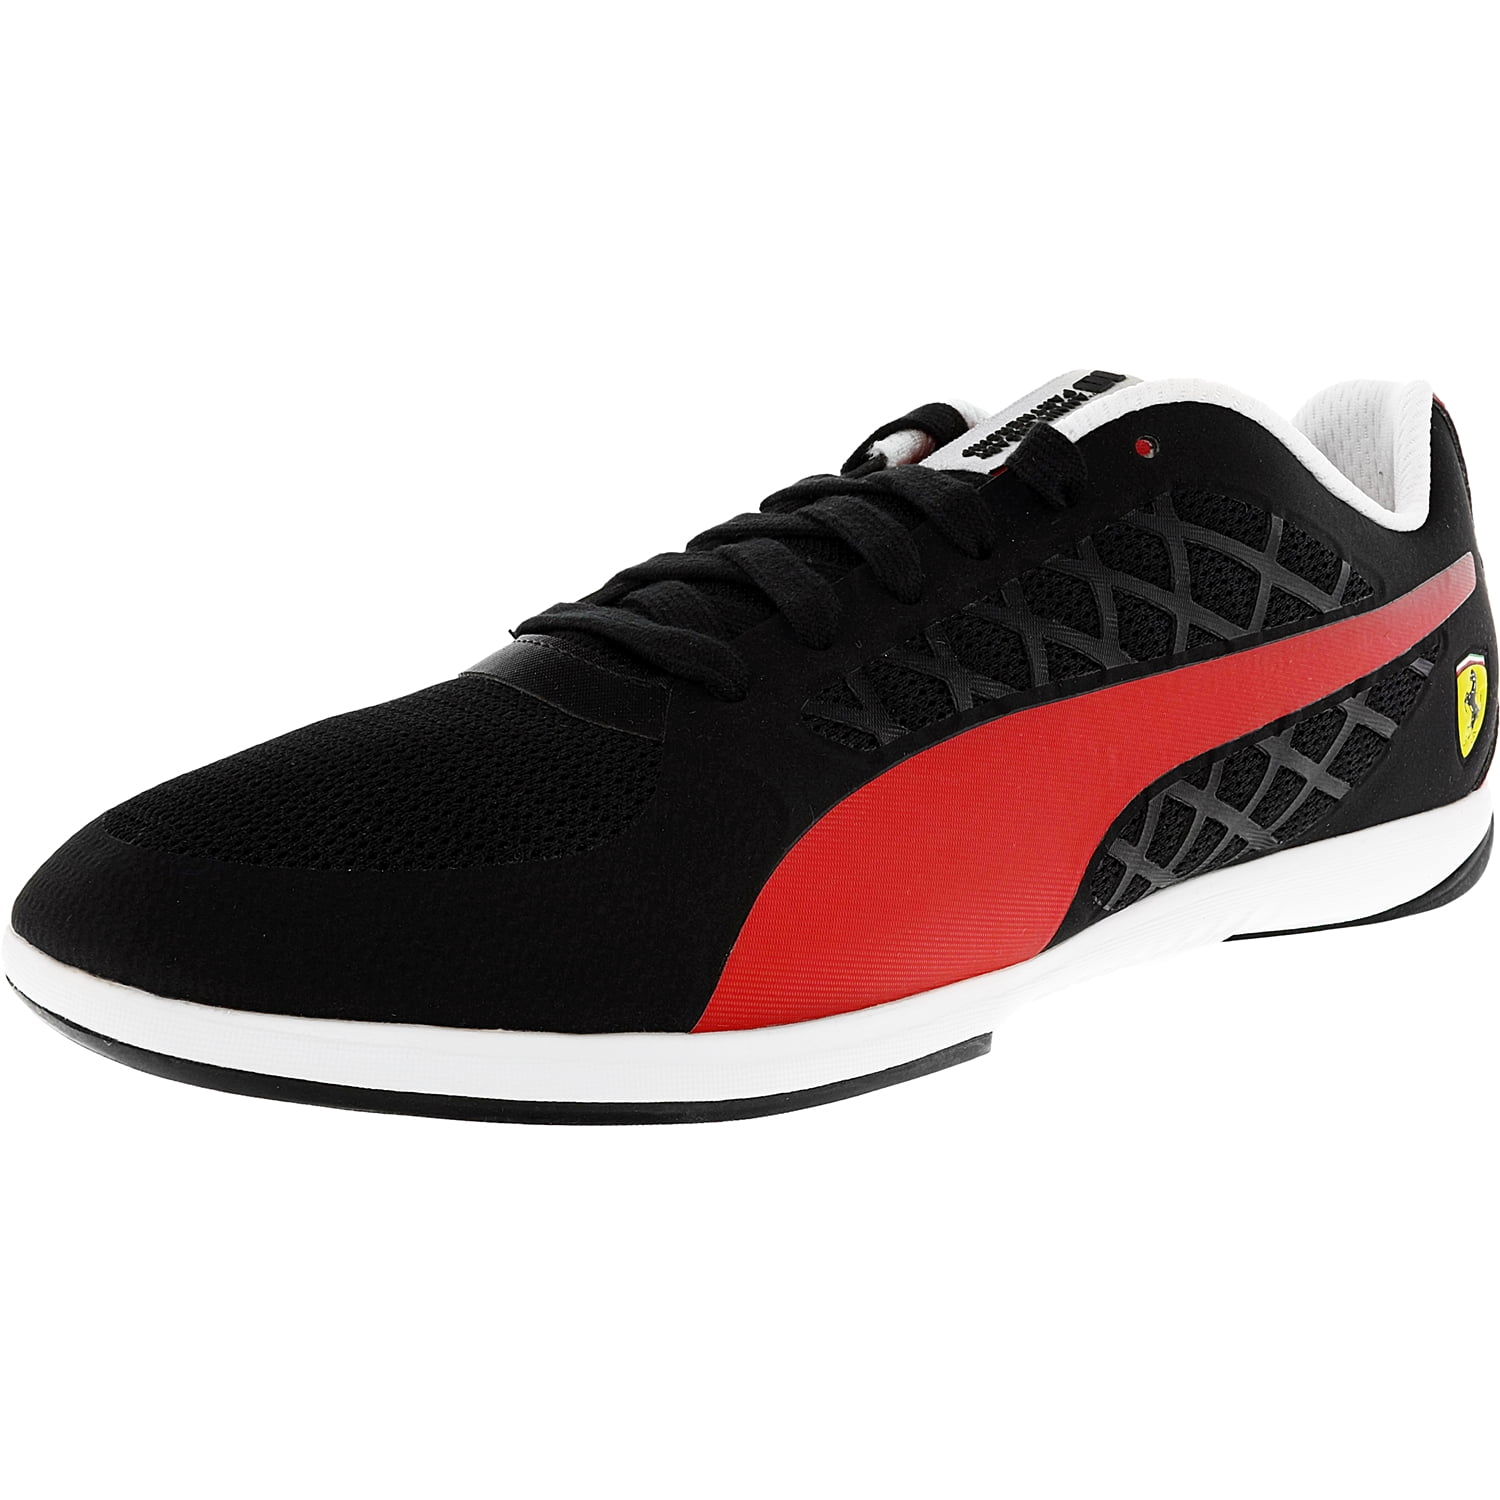 Rosso Corsa Ankle-High Fashion Sneaker 